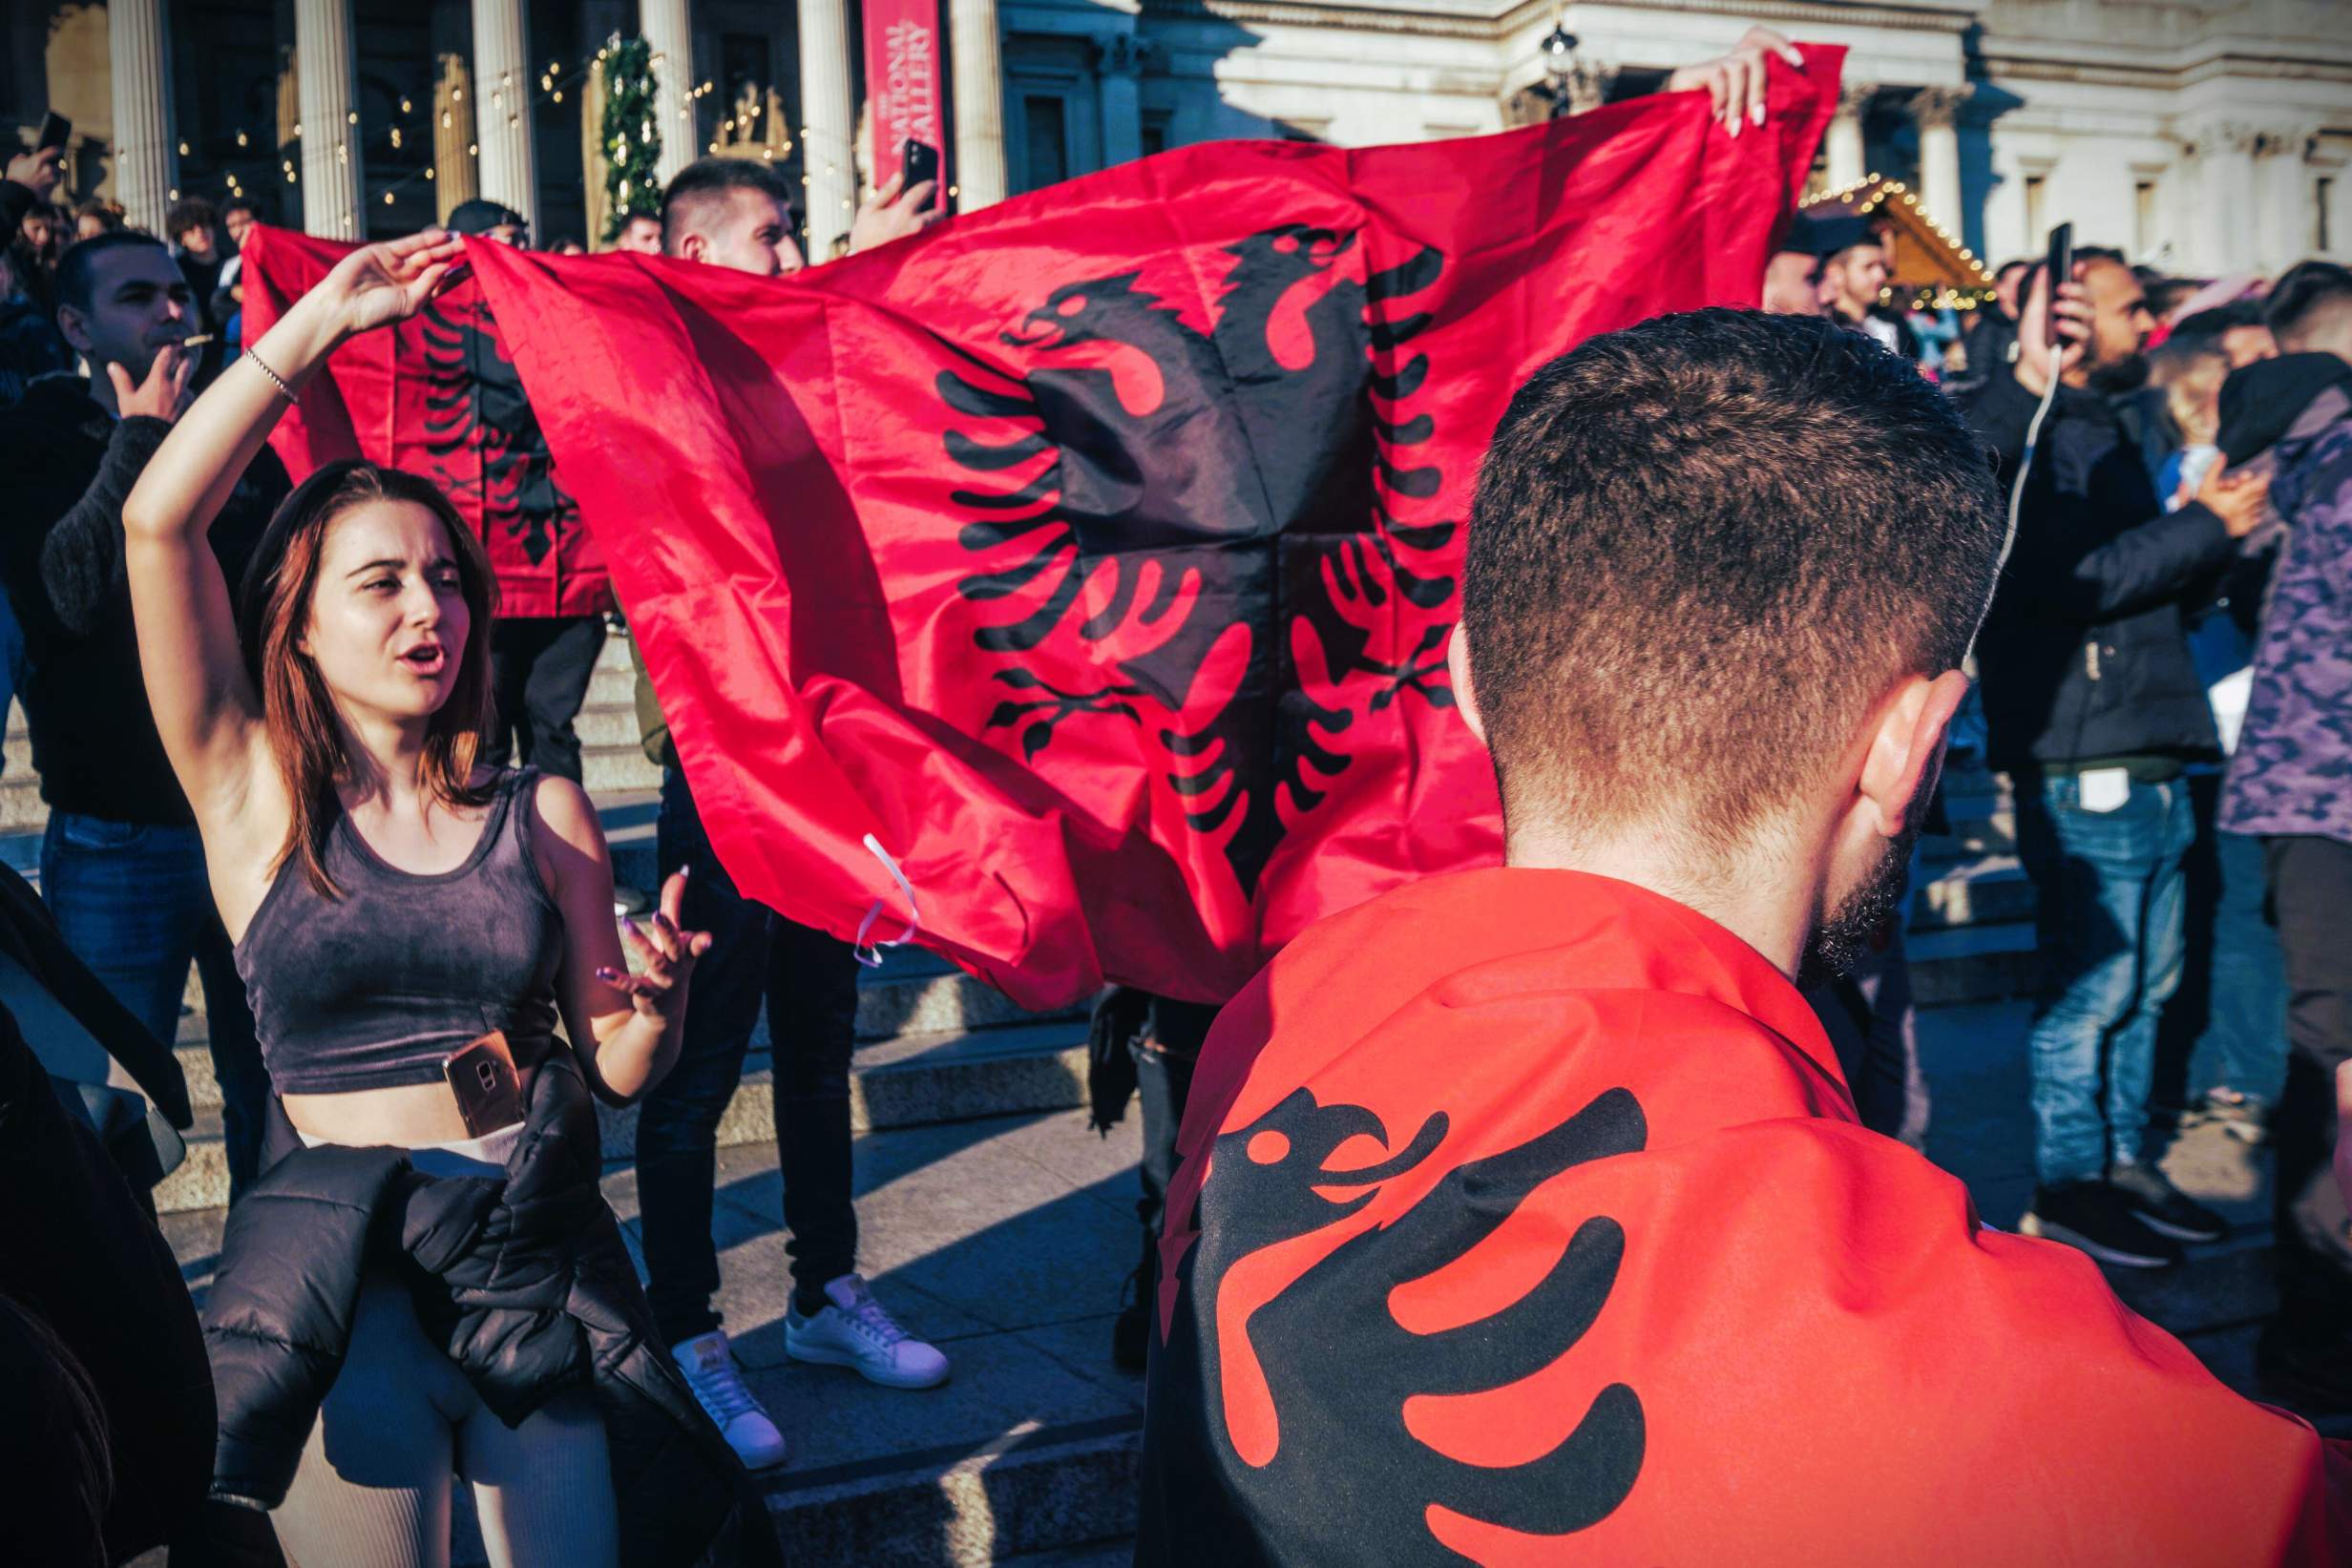 Why We Are Not ‘Albanian Criminals’ Arriving On Your Shores